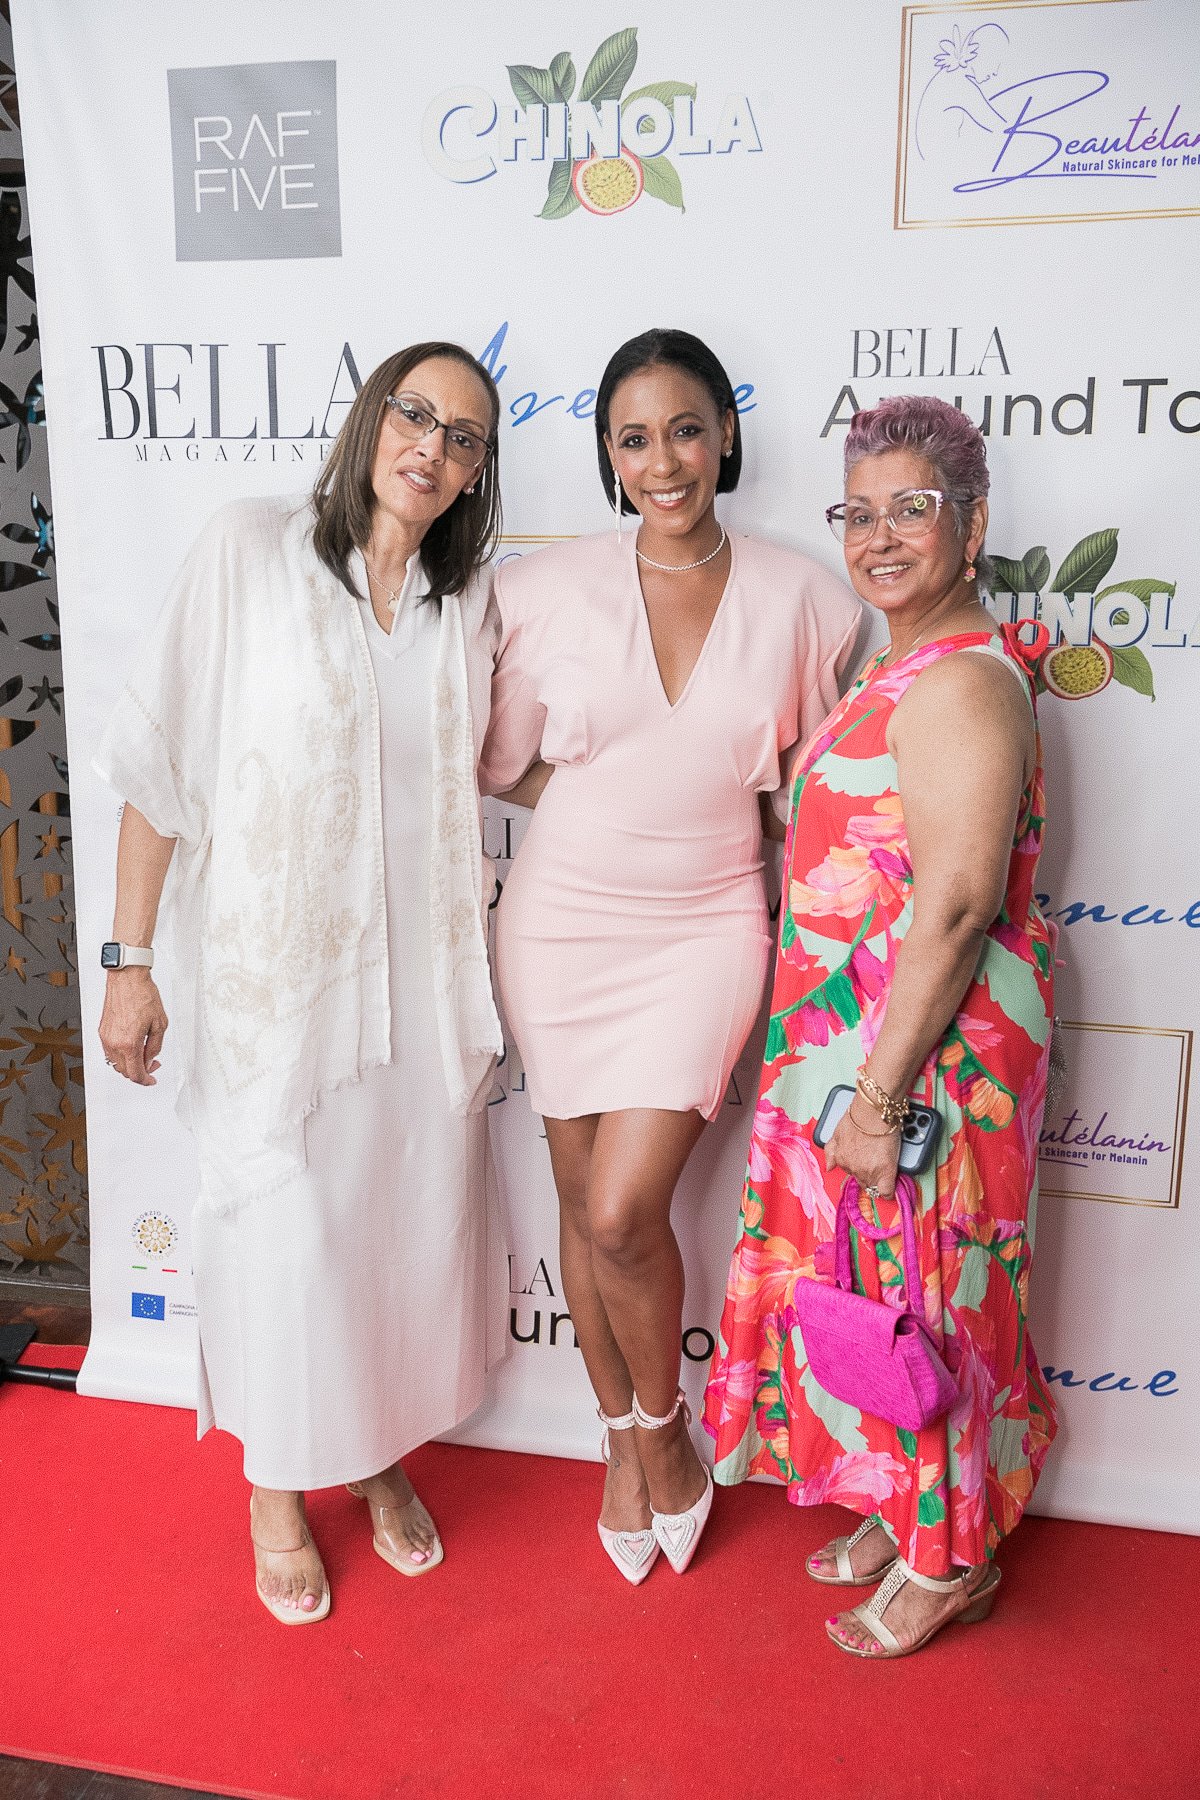 BELLA-MAGAZINE-Summer-Issue-Cover-Party-Avenue-Long-Branch-268.jpg